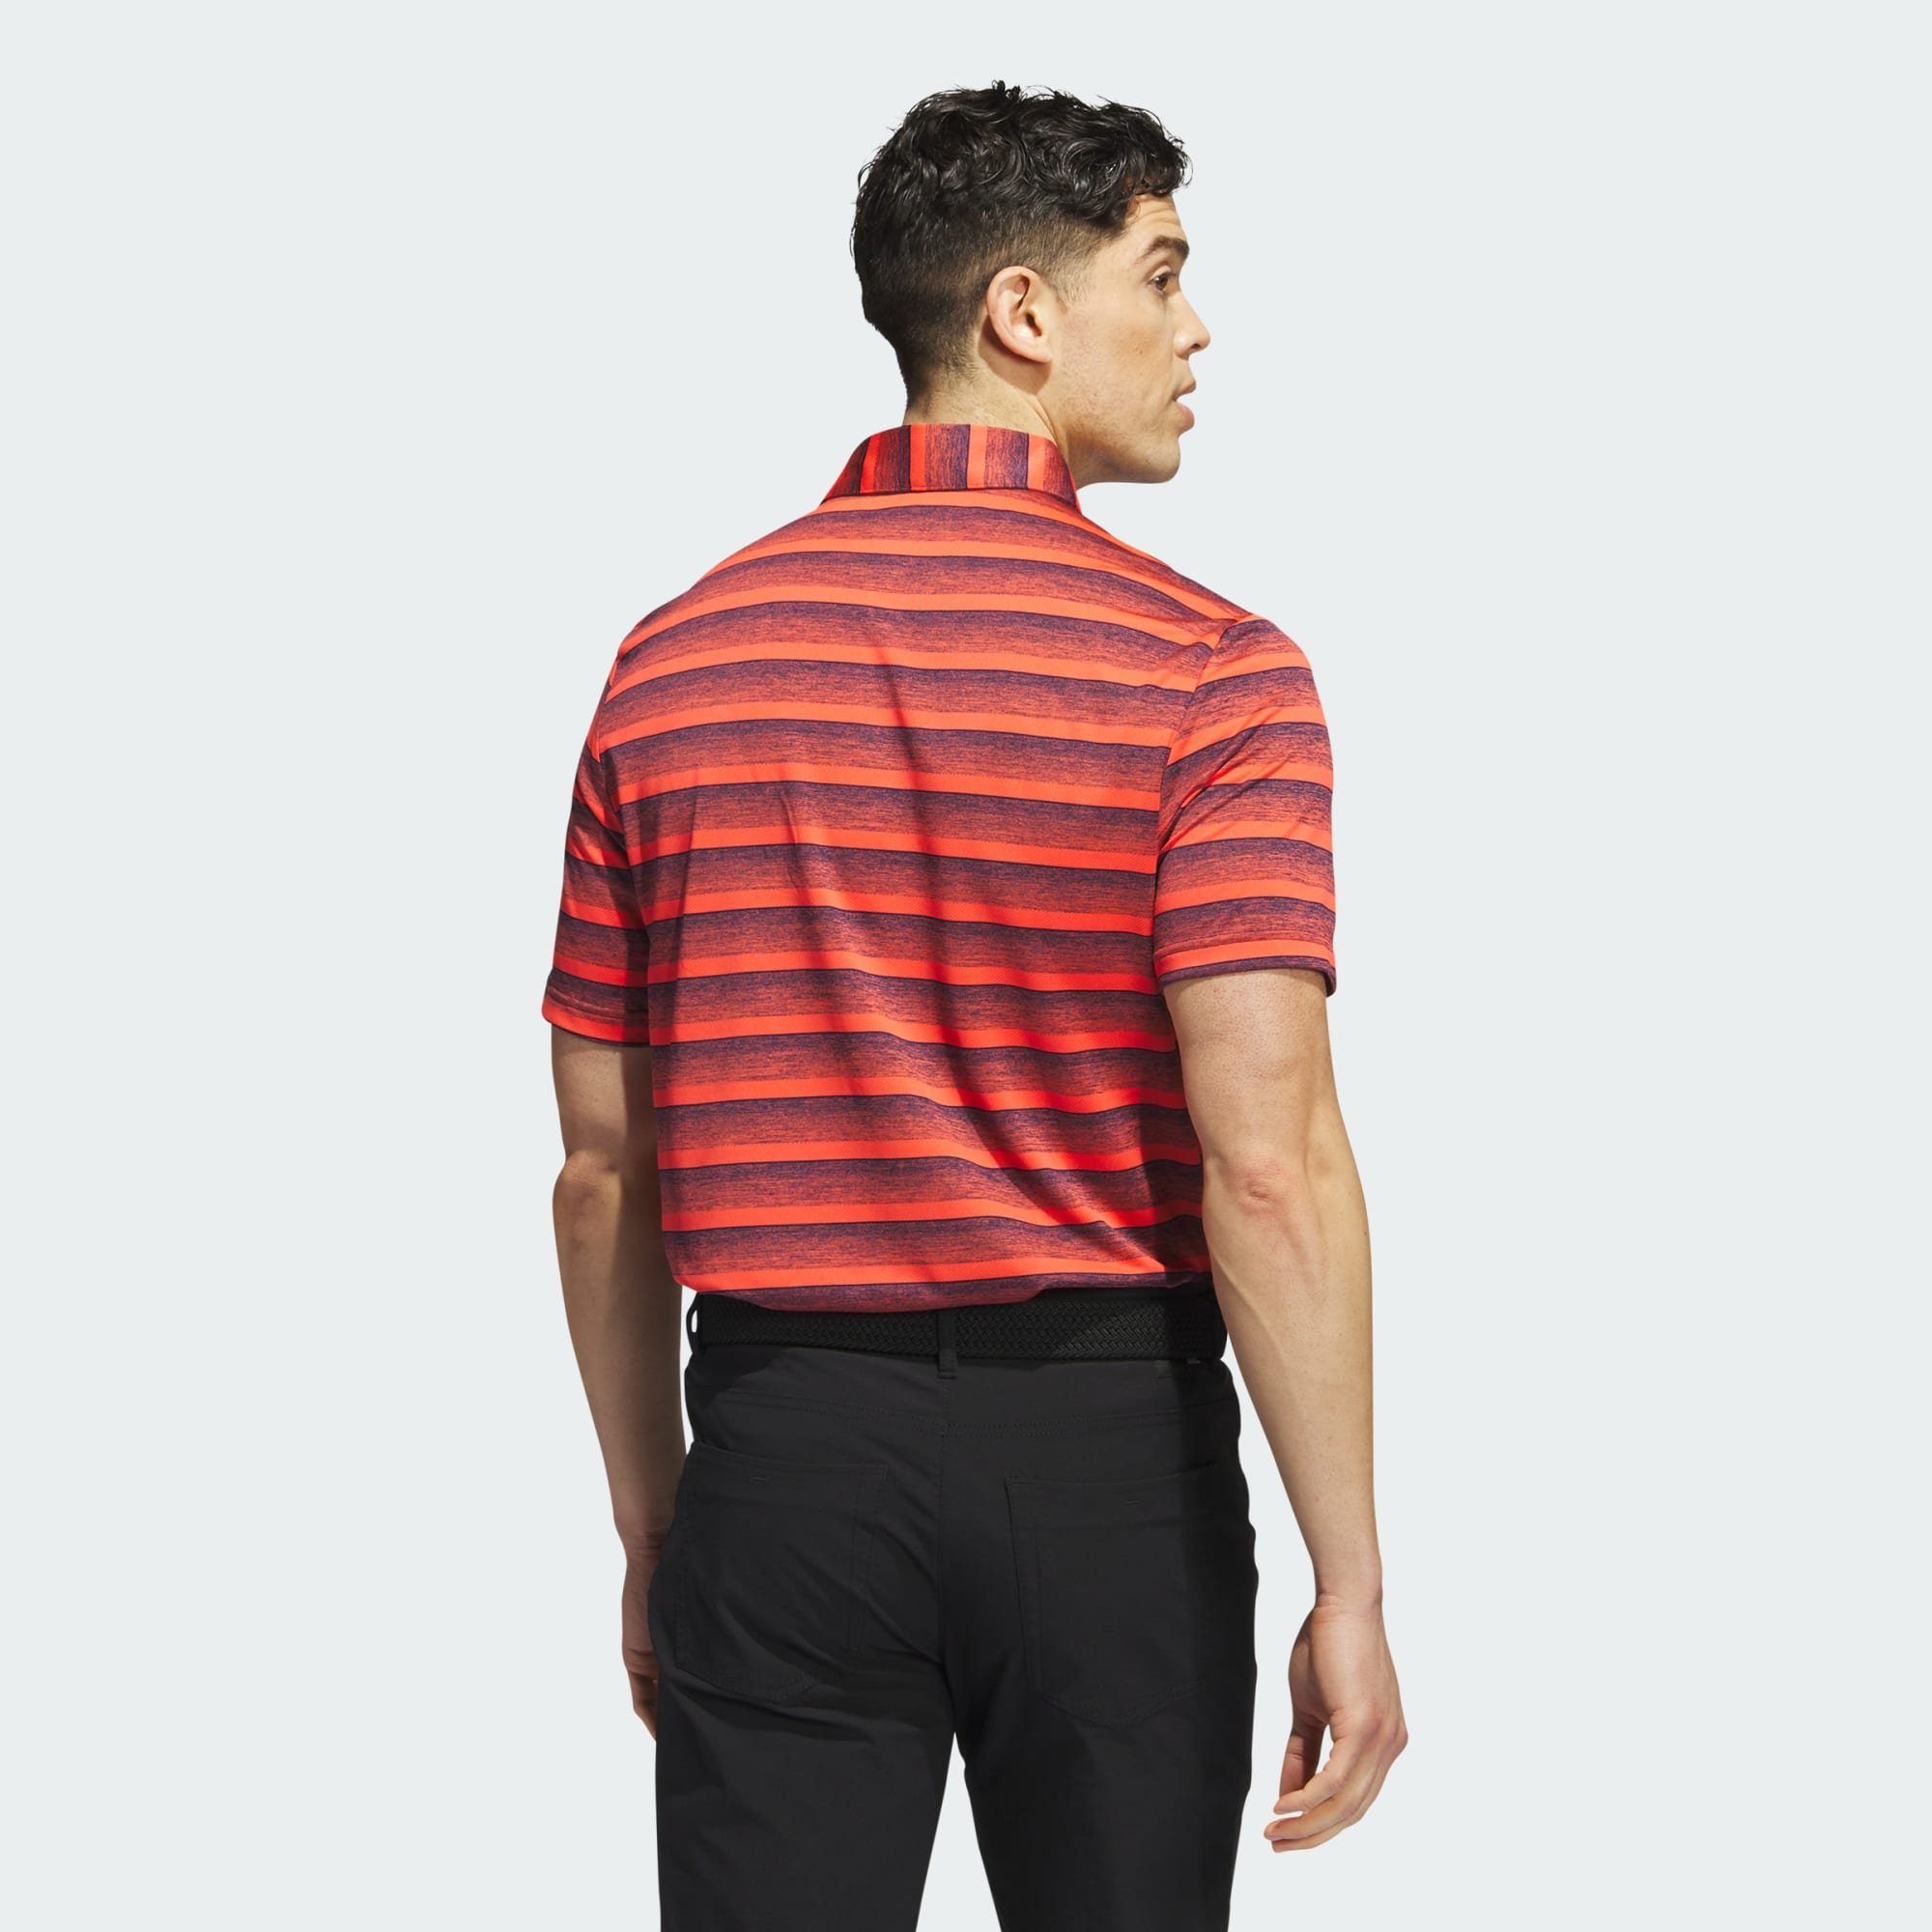 Performance / Bright adidas POLOSHIRT Funktionsshirt Navy STRIPE TWO-COLOR Collegiate Red